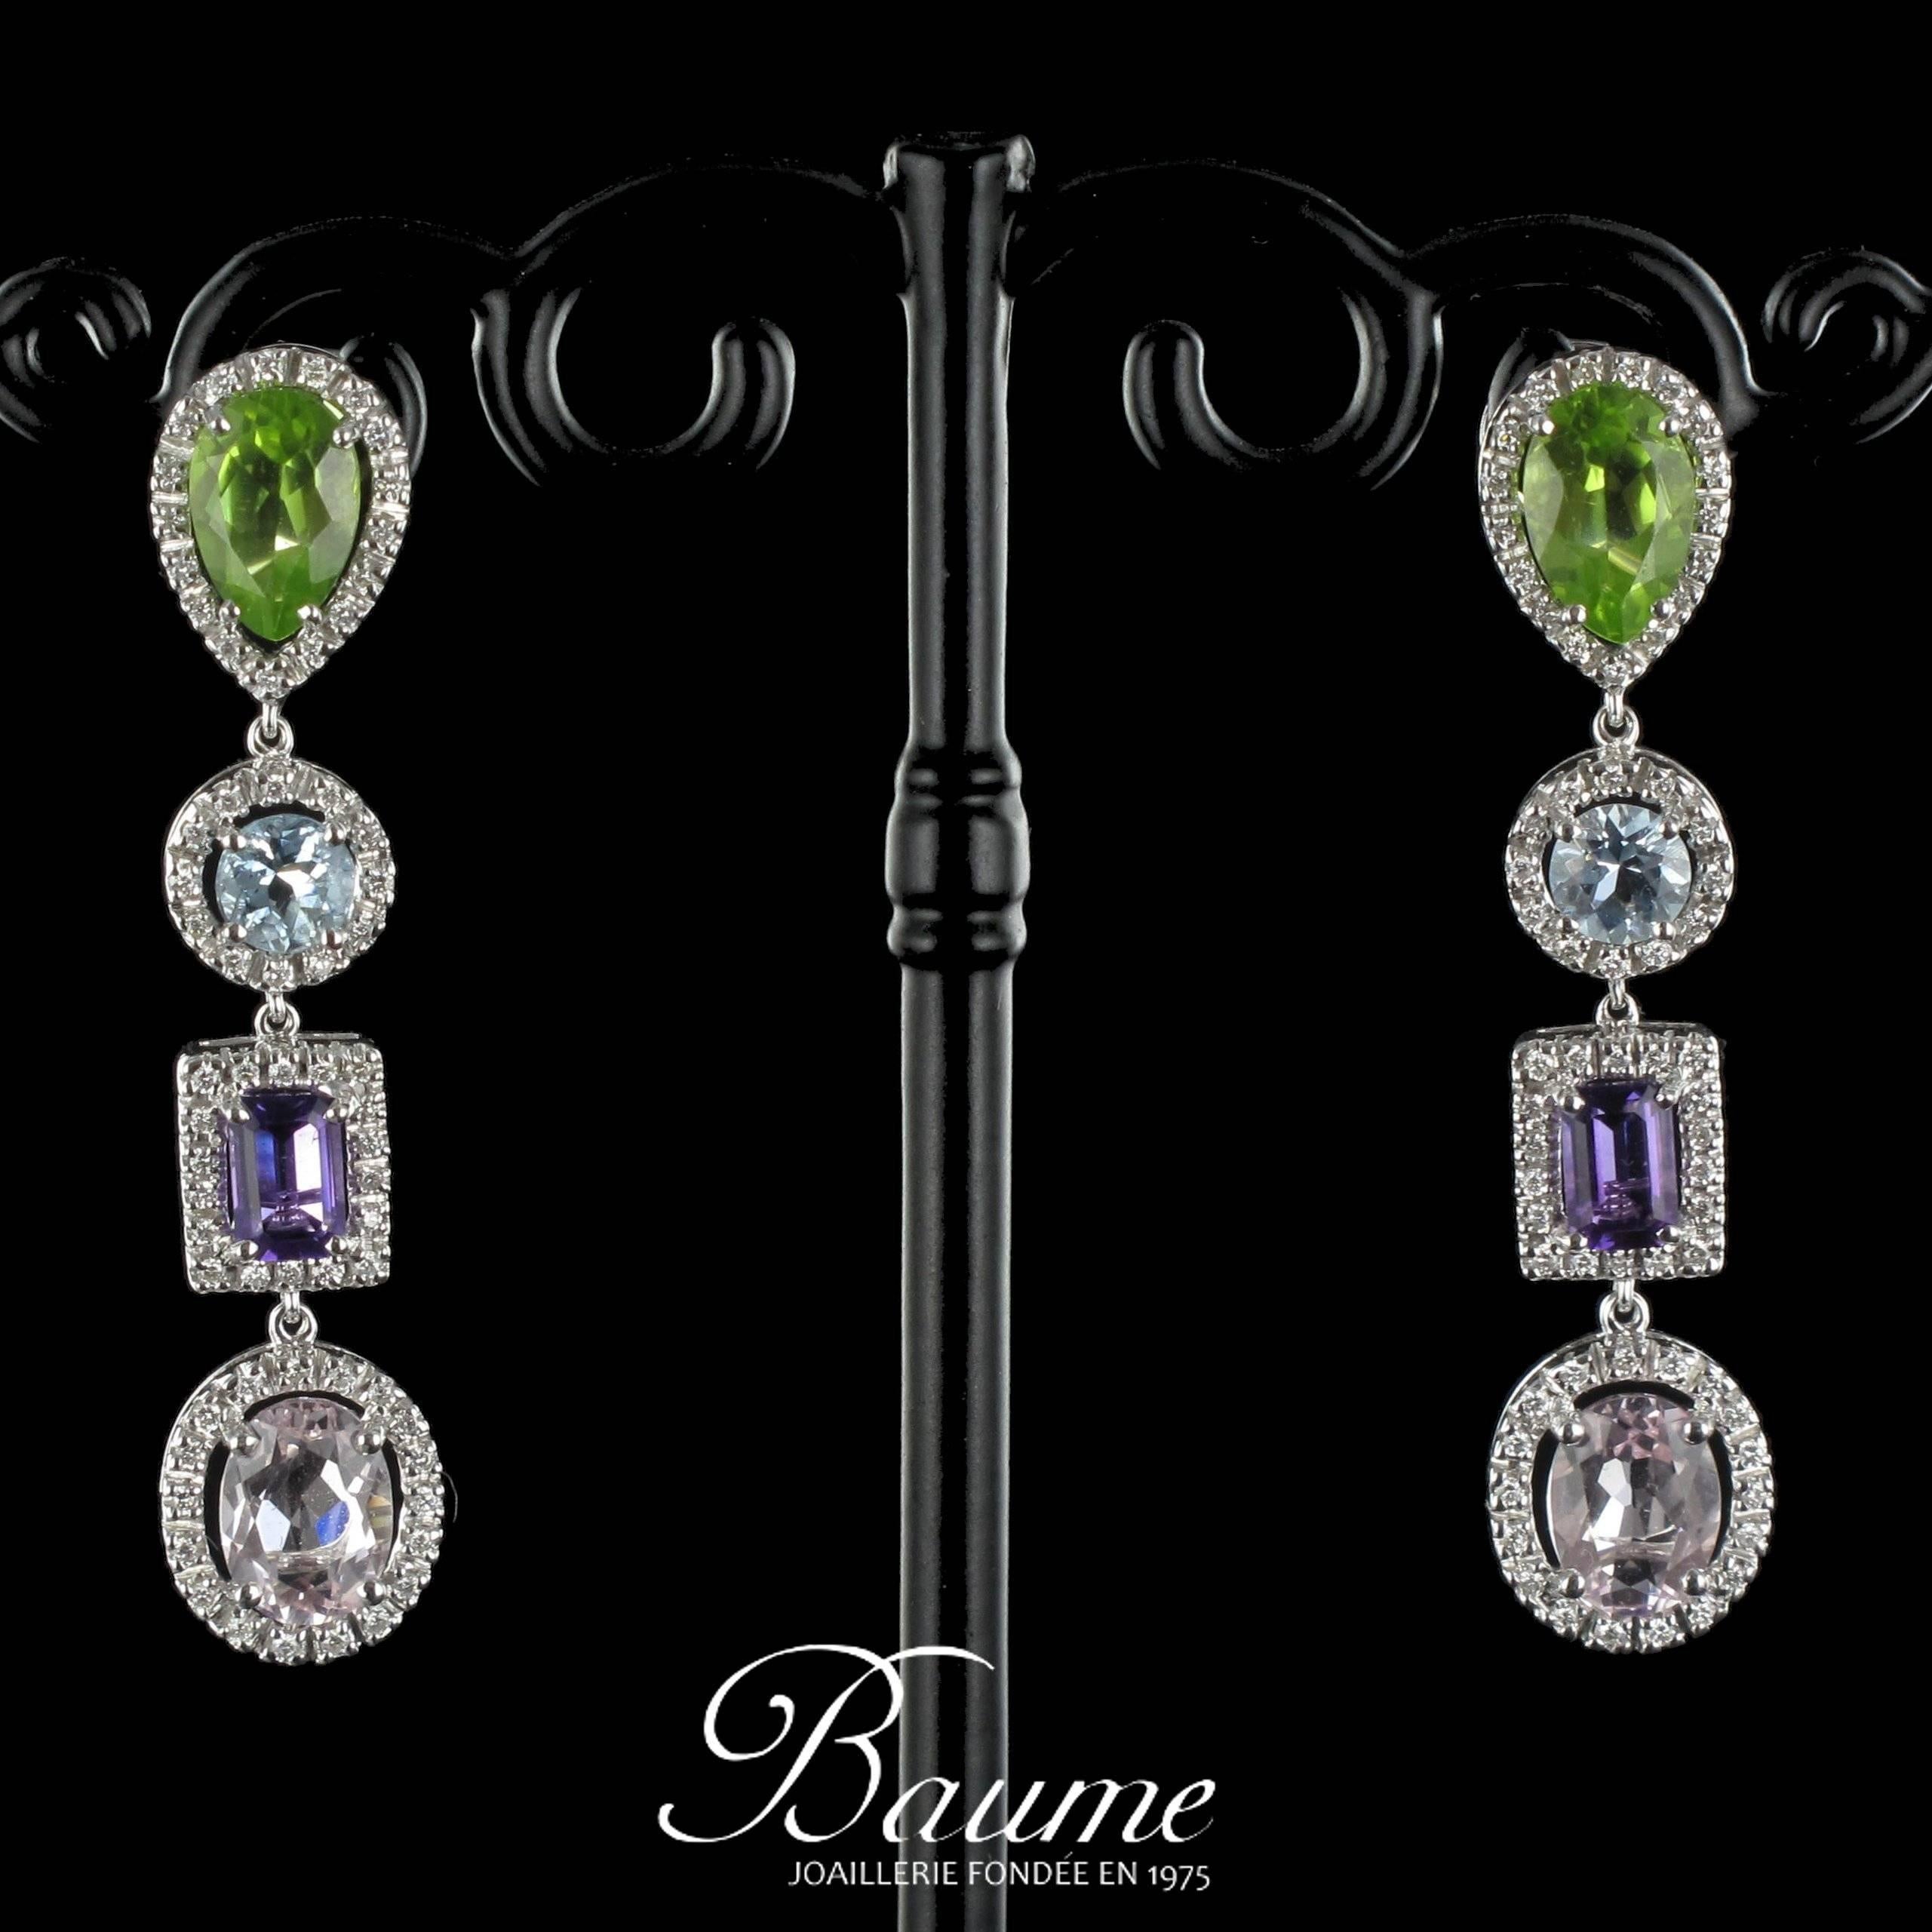 For pierced ears. Pair of earrings in 18 carat white gold.

Each earring is set with a pear shaped peridot surrounded by diamonds holding a suspended round aquamarine surrounded by diamonds, an emerald cut amethyst surrounded by diamonds and an